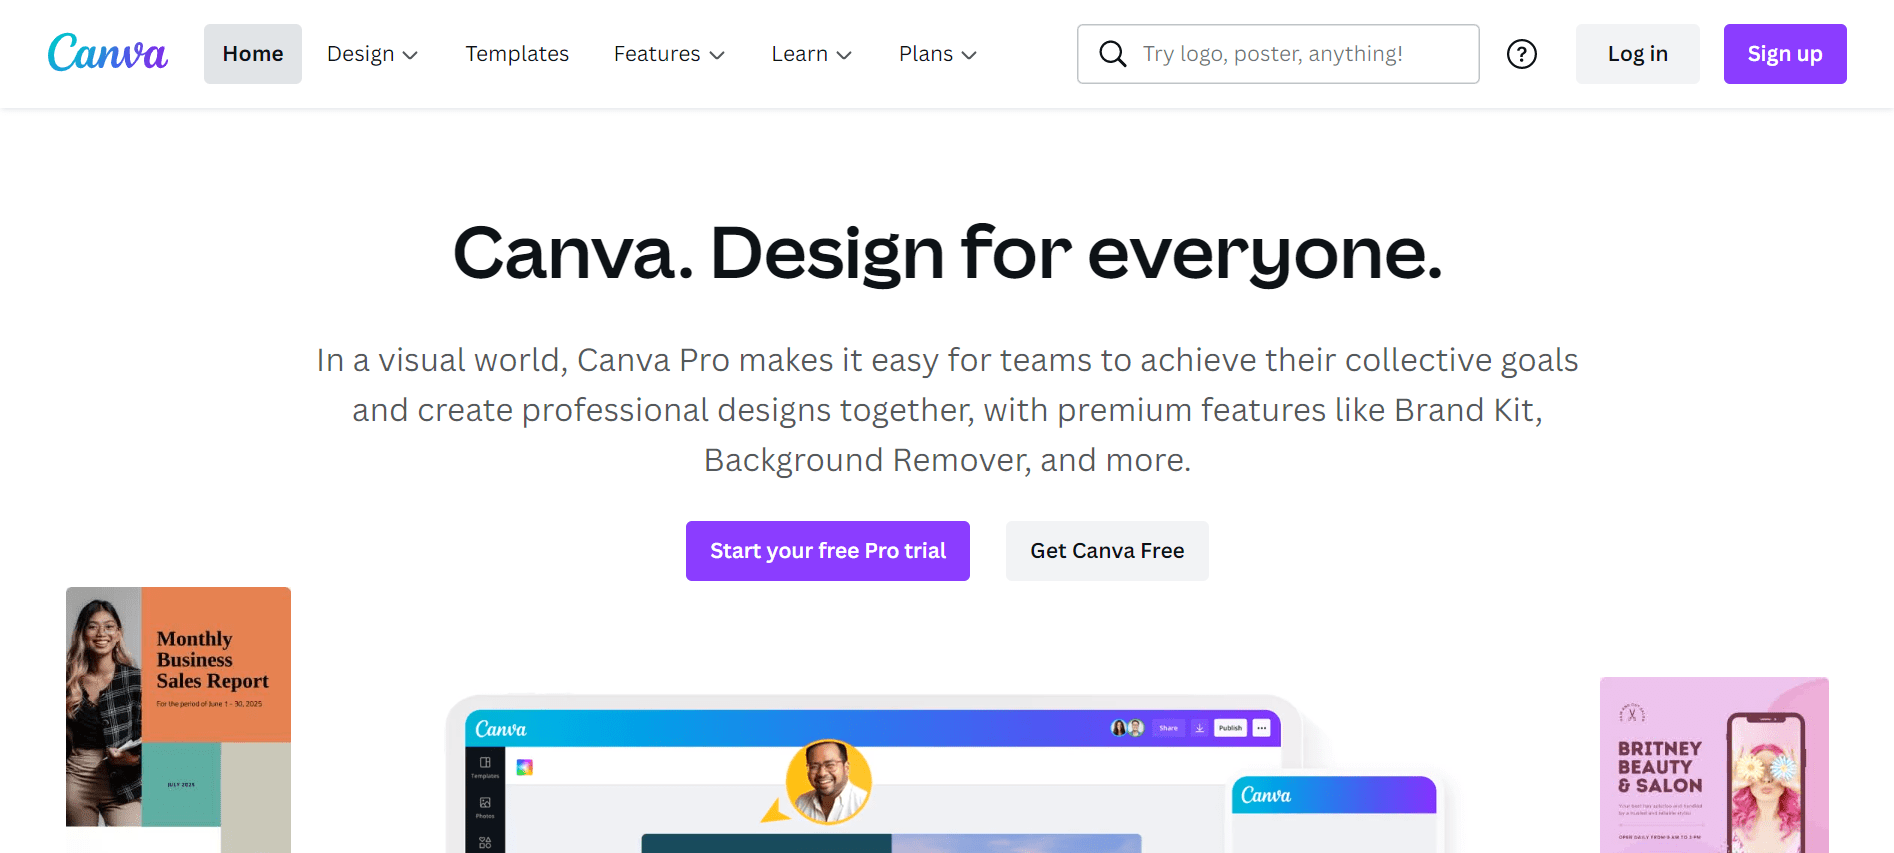 Canva Free Trial